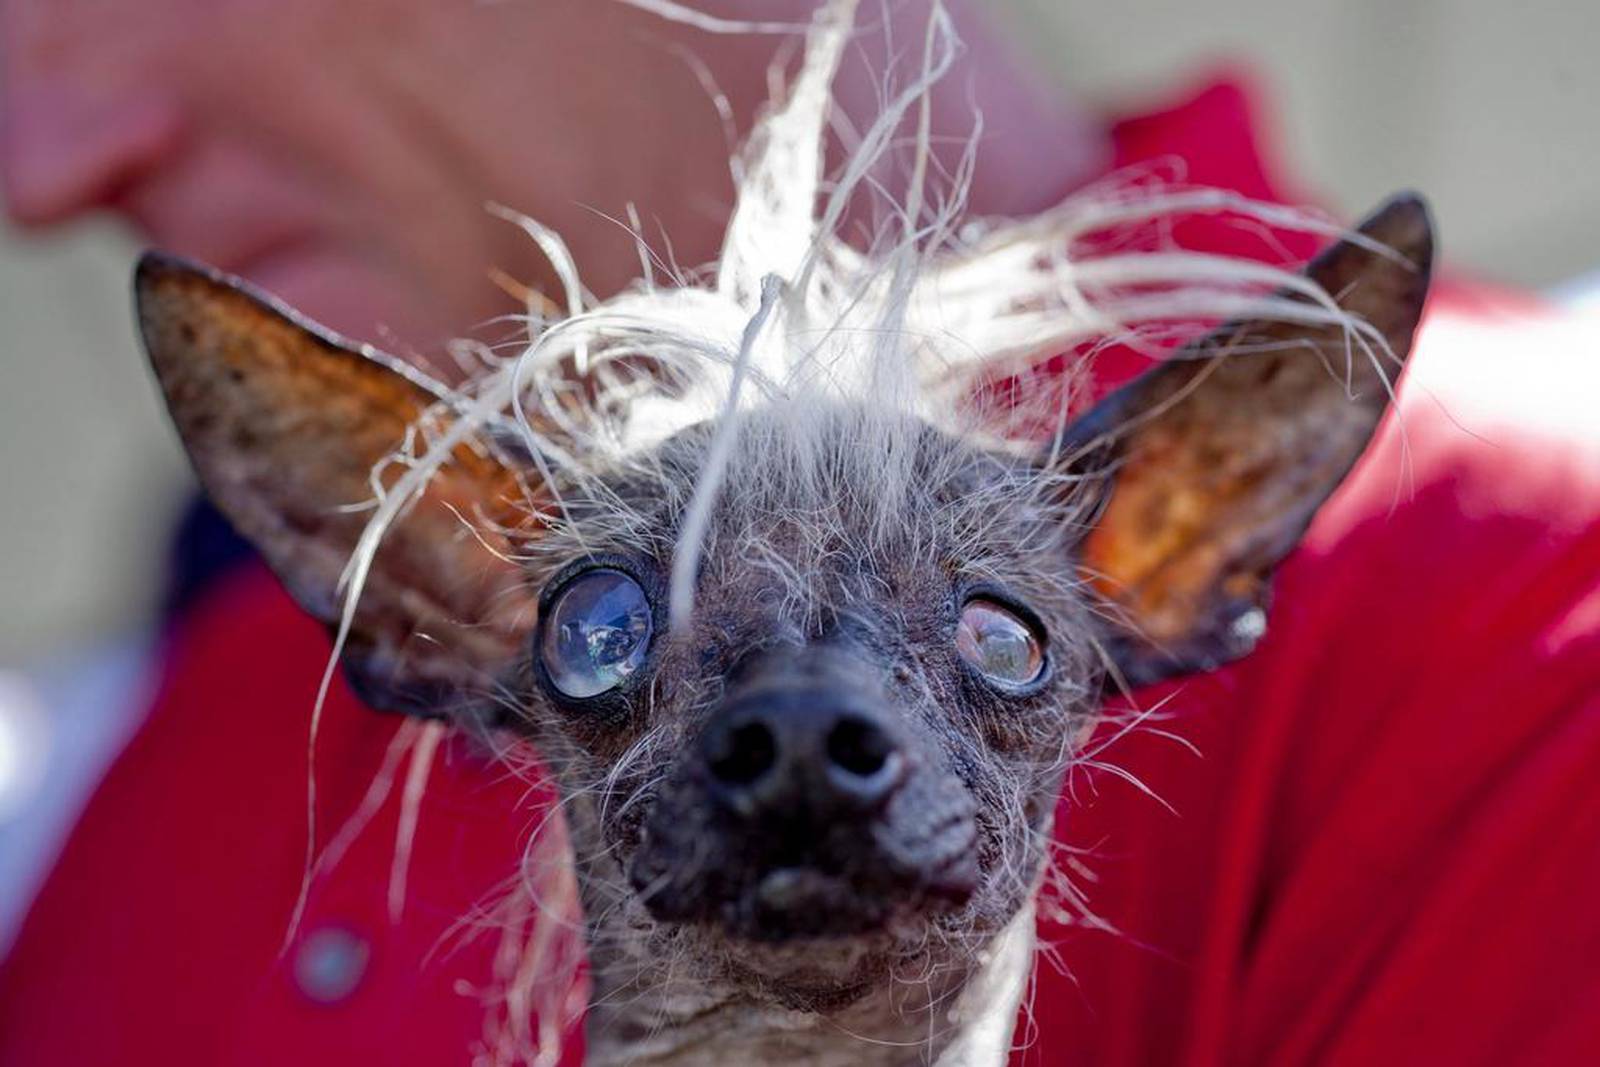 In pictures: Peanut, the World’s ugliest dog